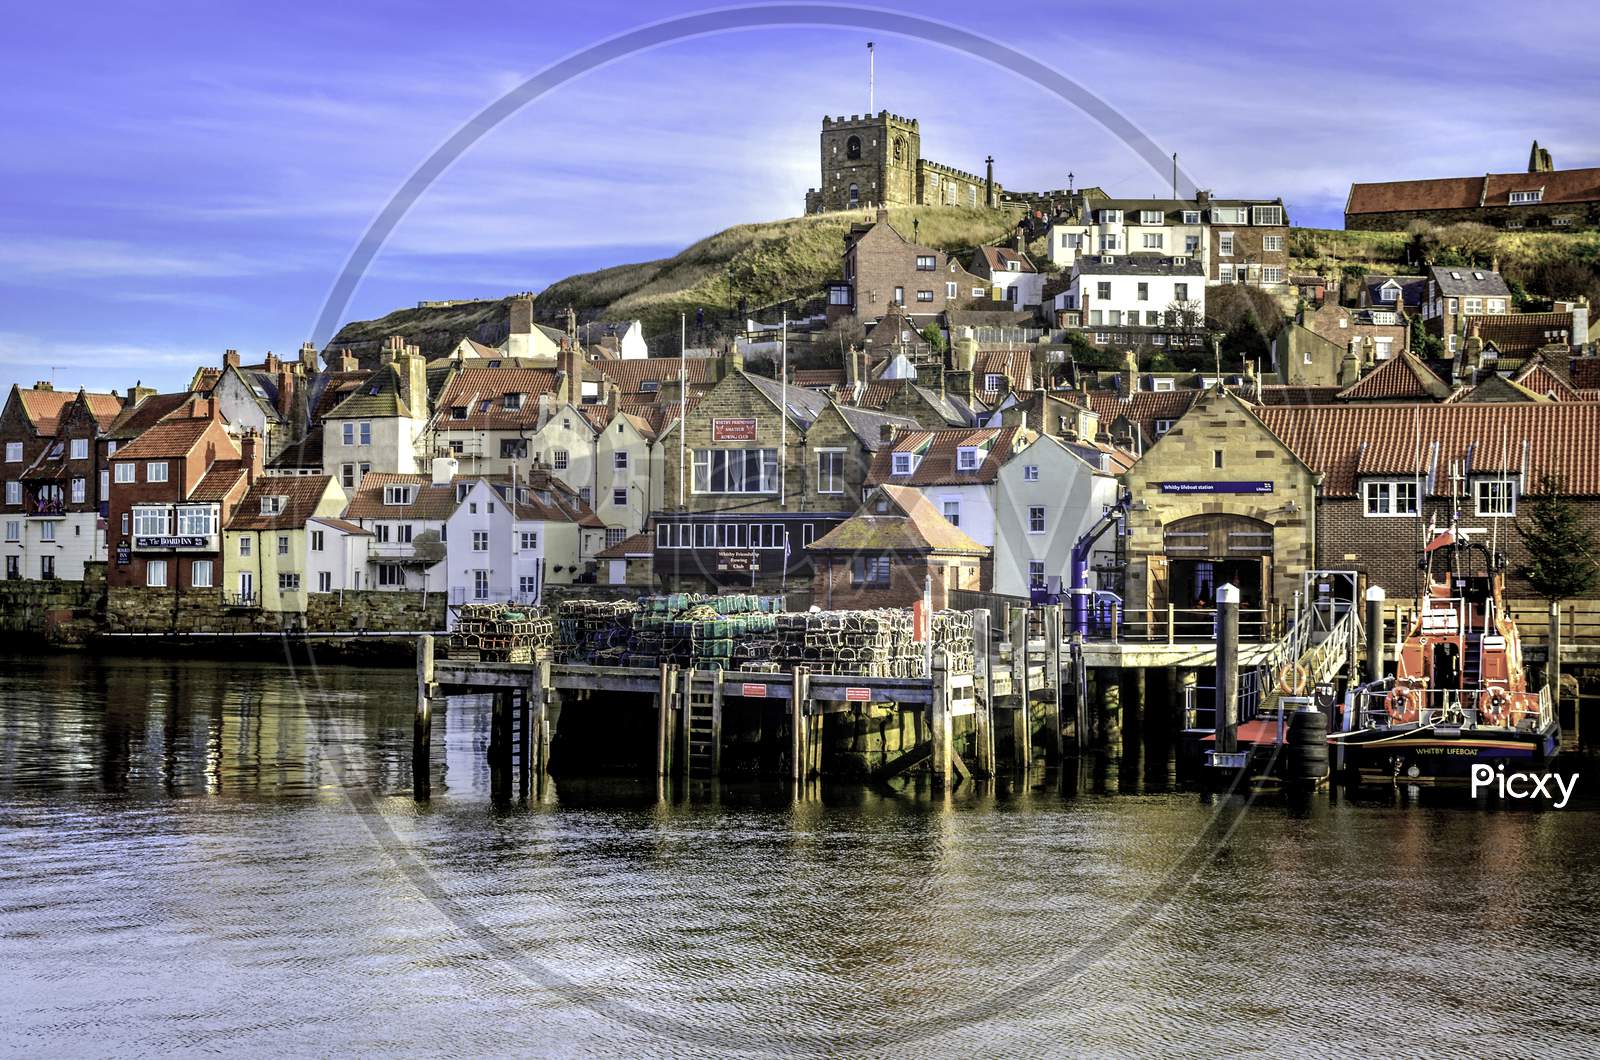 Whitby harbour showing Life boat station